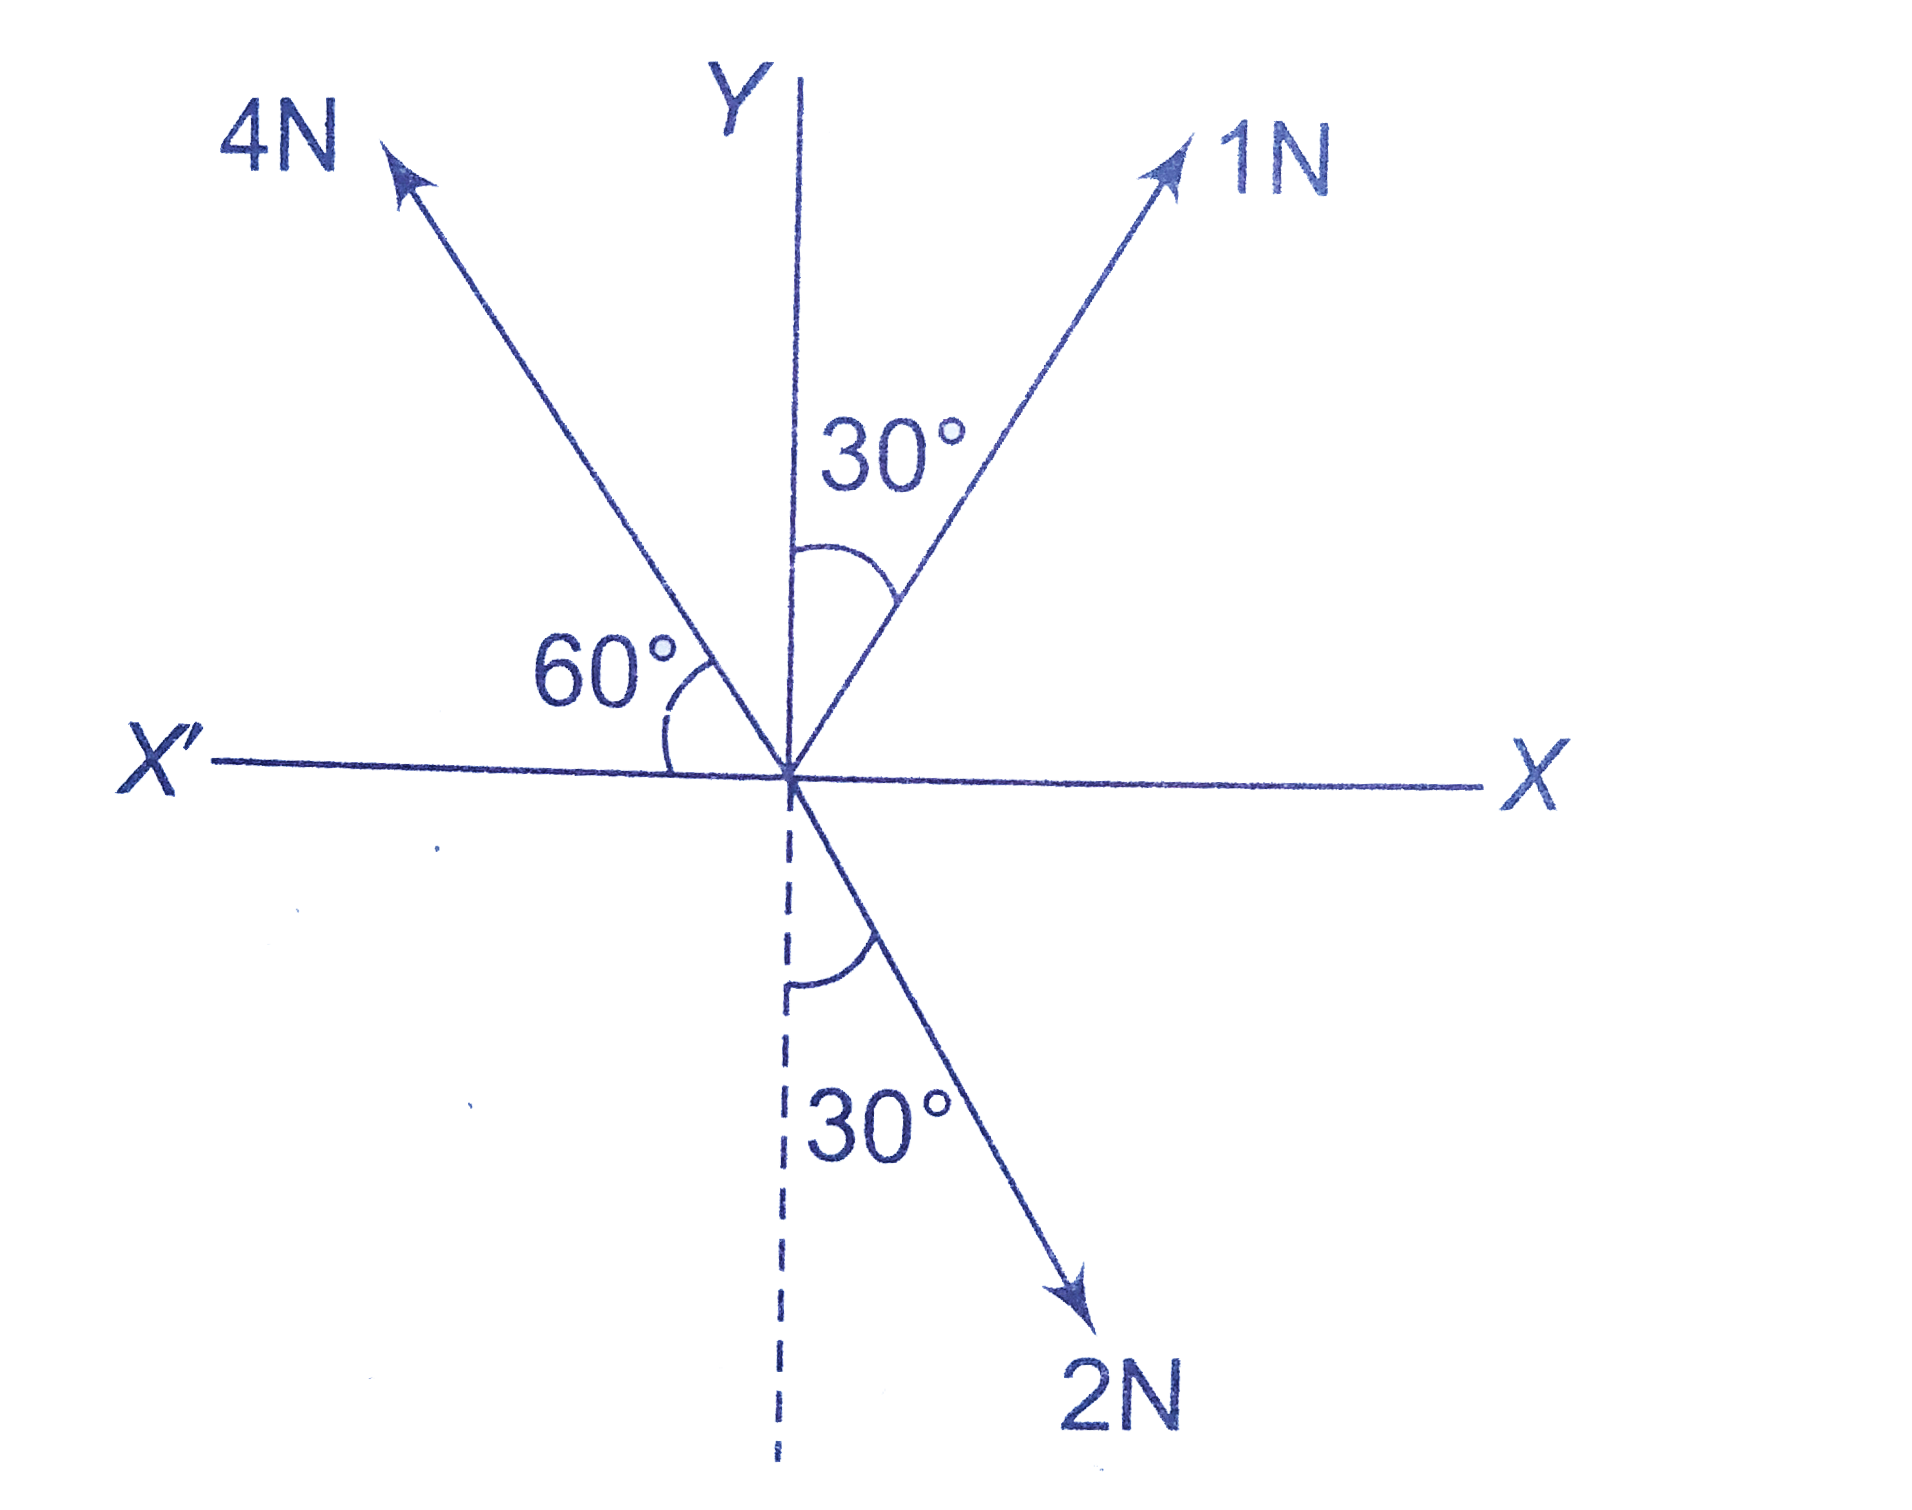 Three forces are acting on a particle as shown in the figure. To have the resultant force only along the Y-direction, the magnitude of the maximum additional force needed is